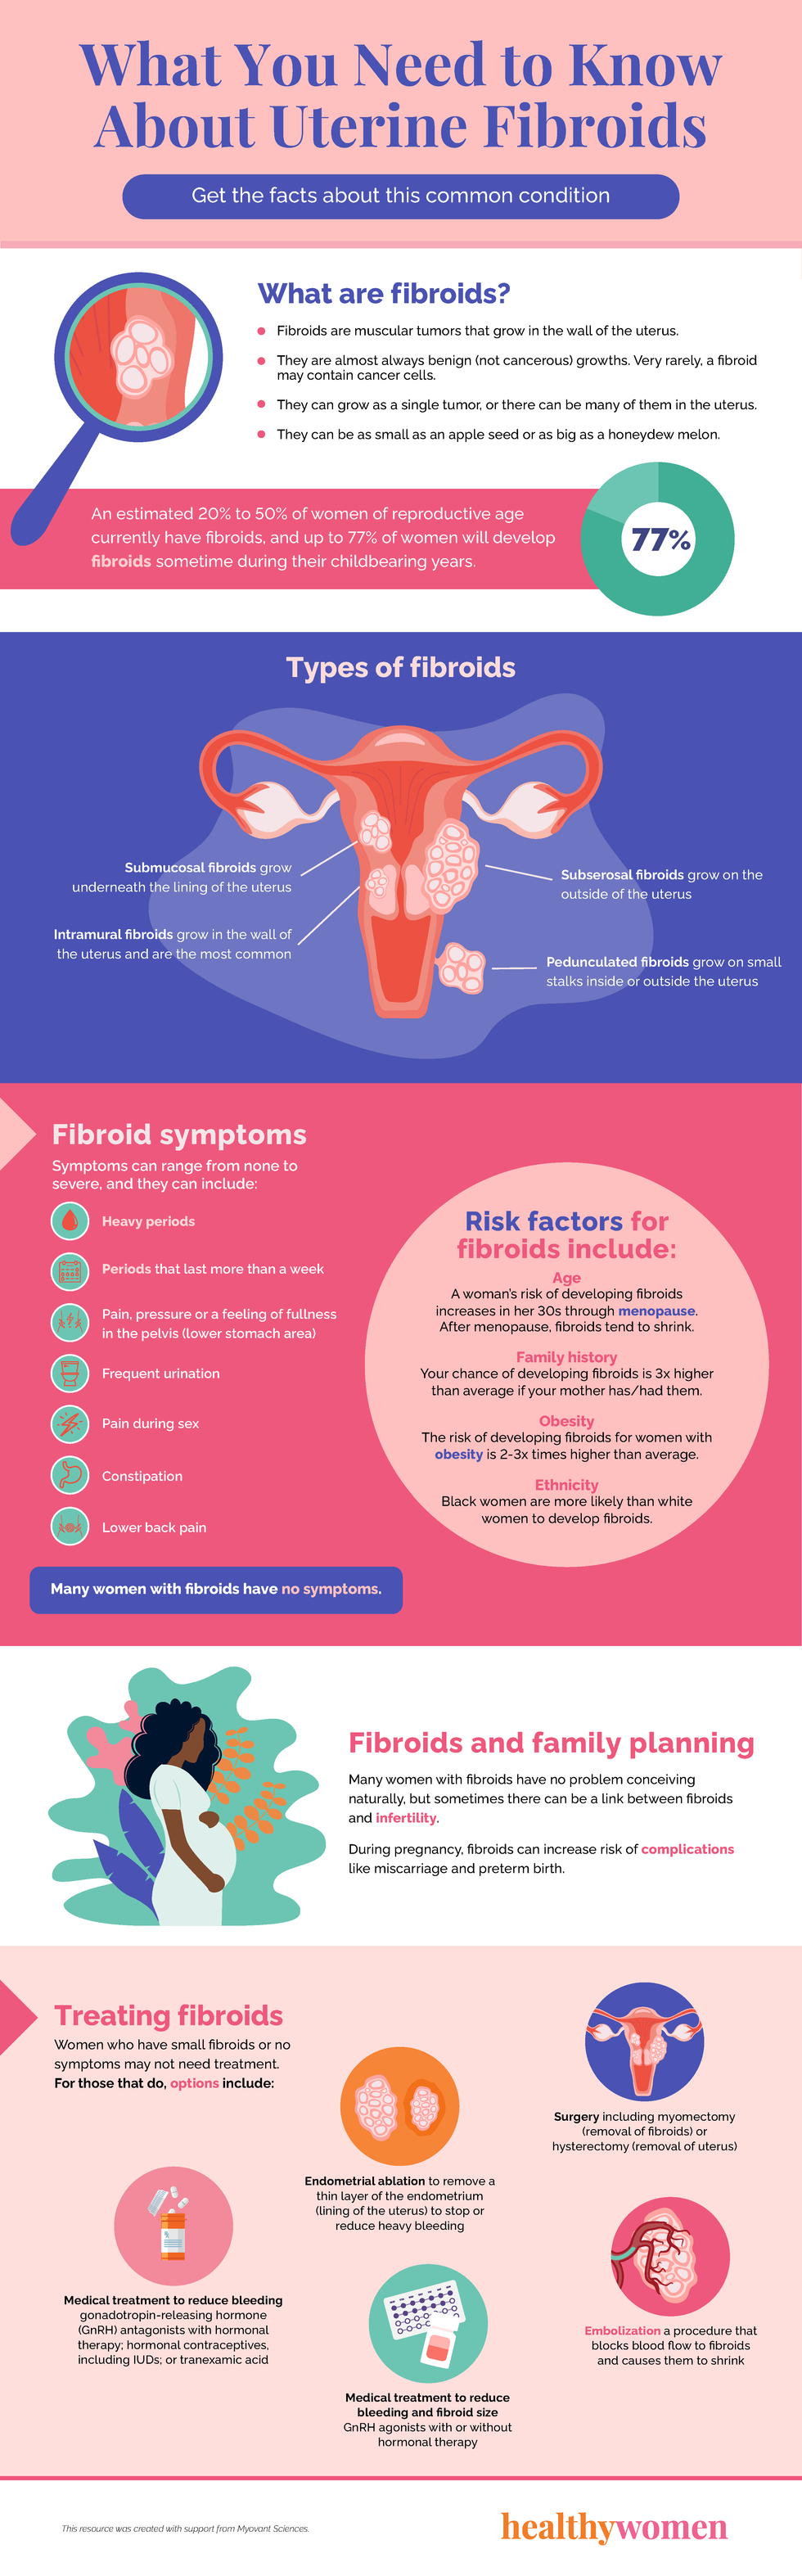 infographic of information on uterine fibroids. Click to read PDF.